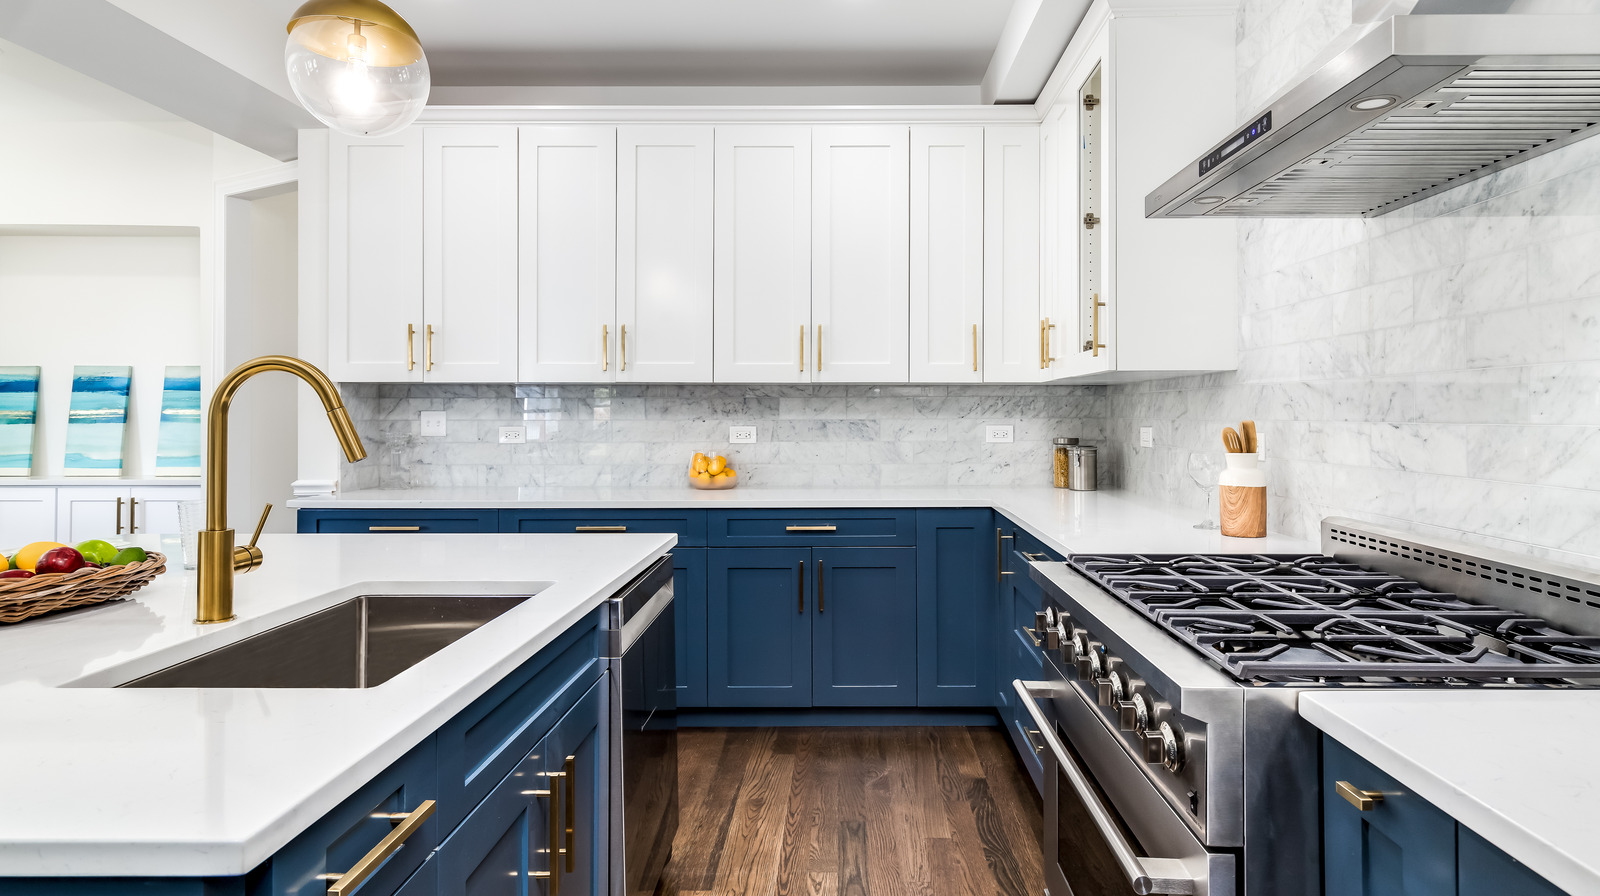 https://www.housedigest.com/img/gallery/these-are-the-best-kitchen-cabinet-colors/l-intro-1642456743.jpg